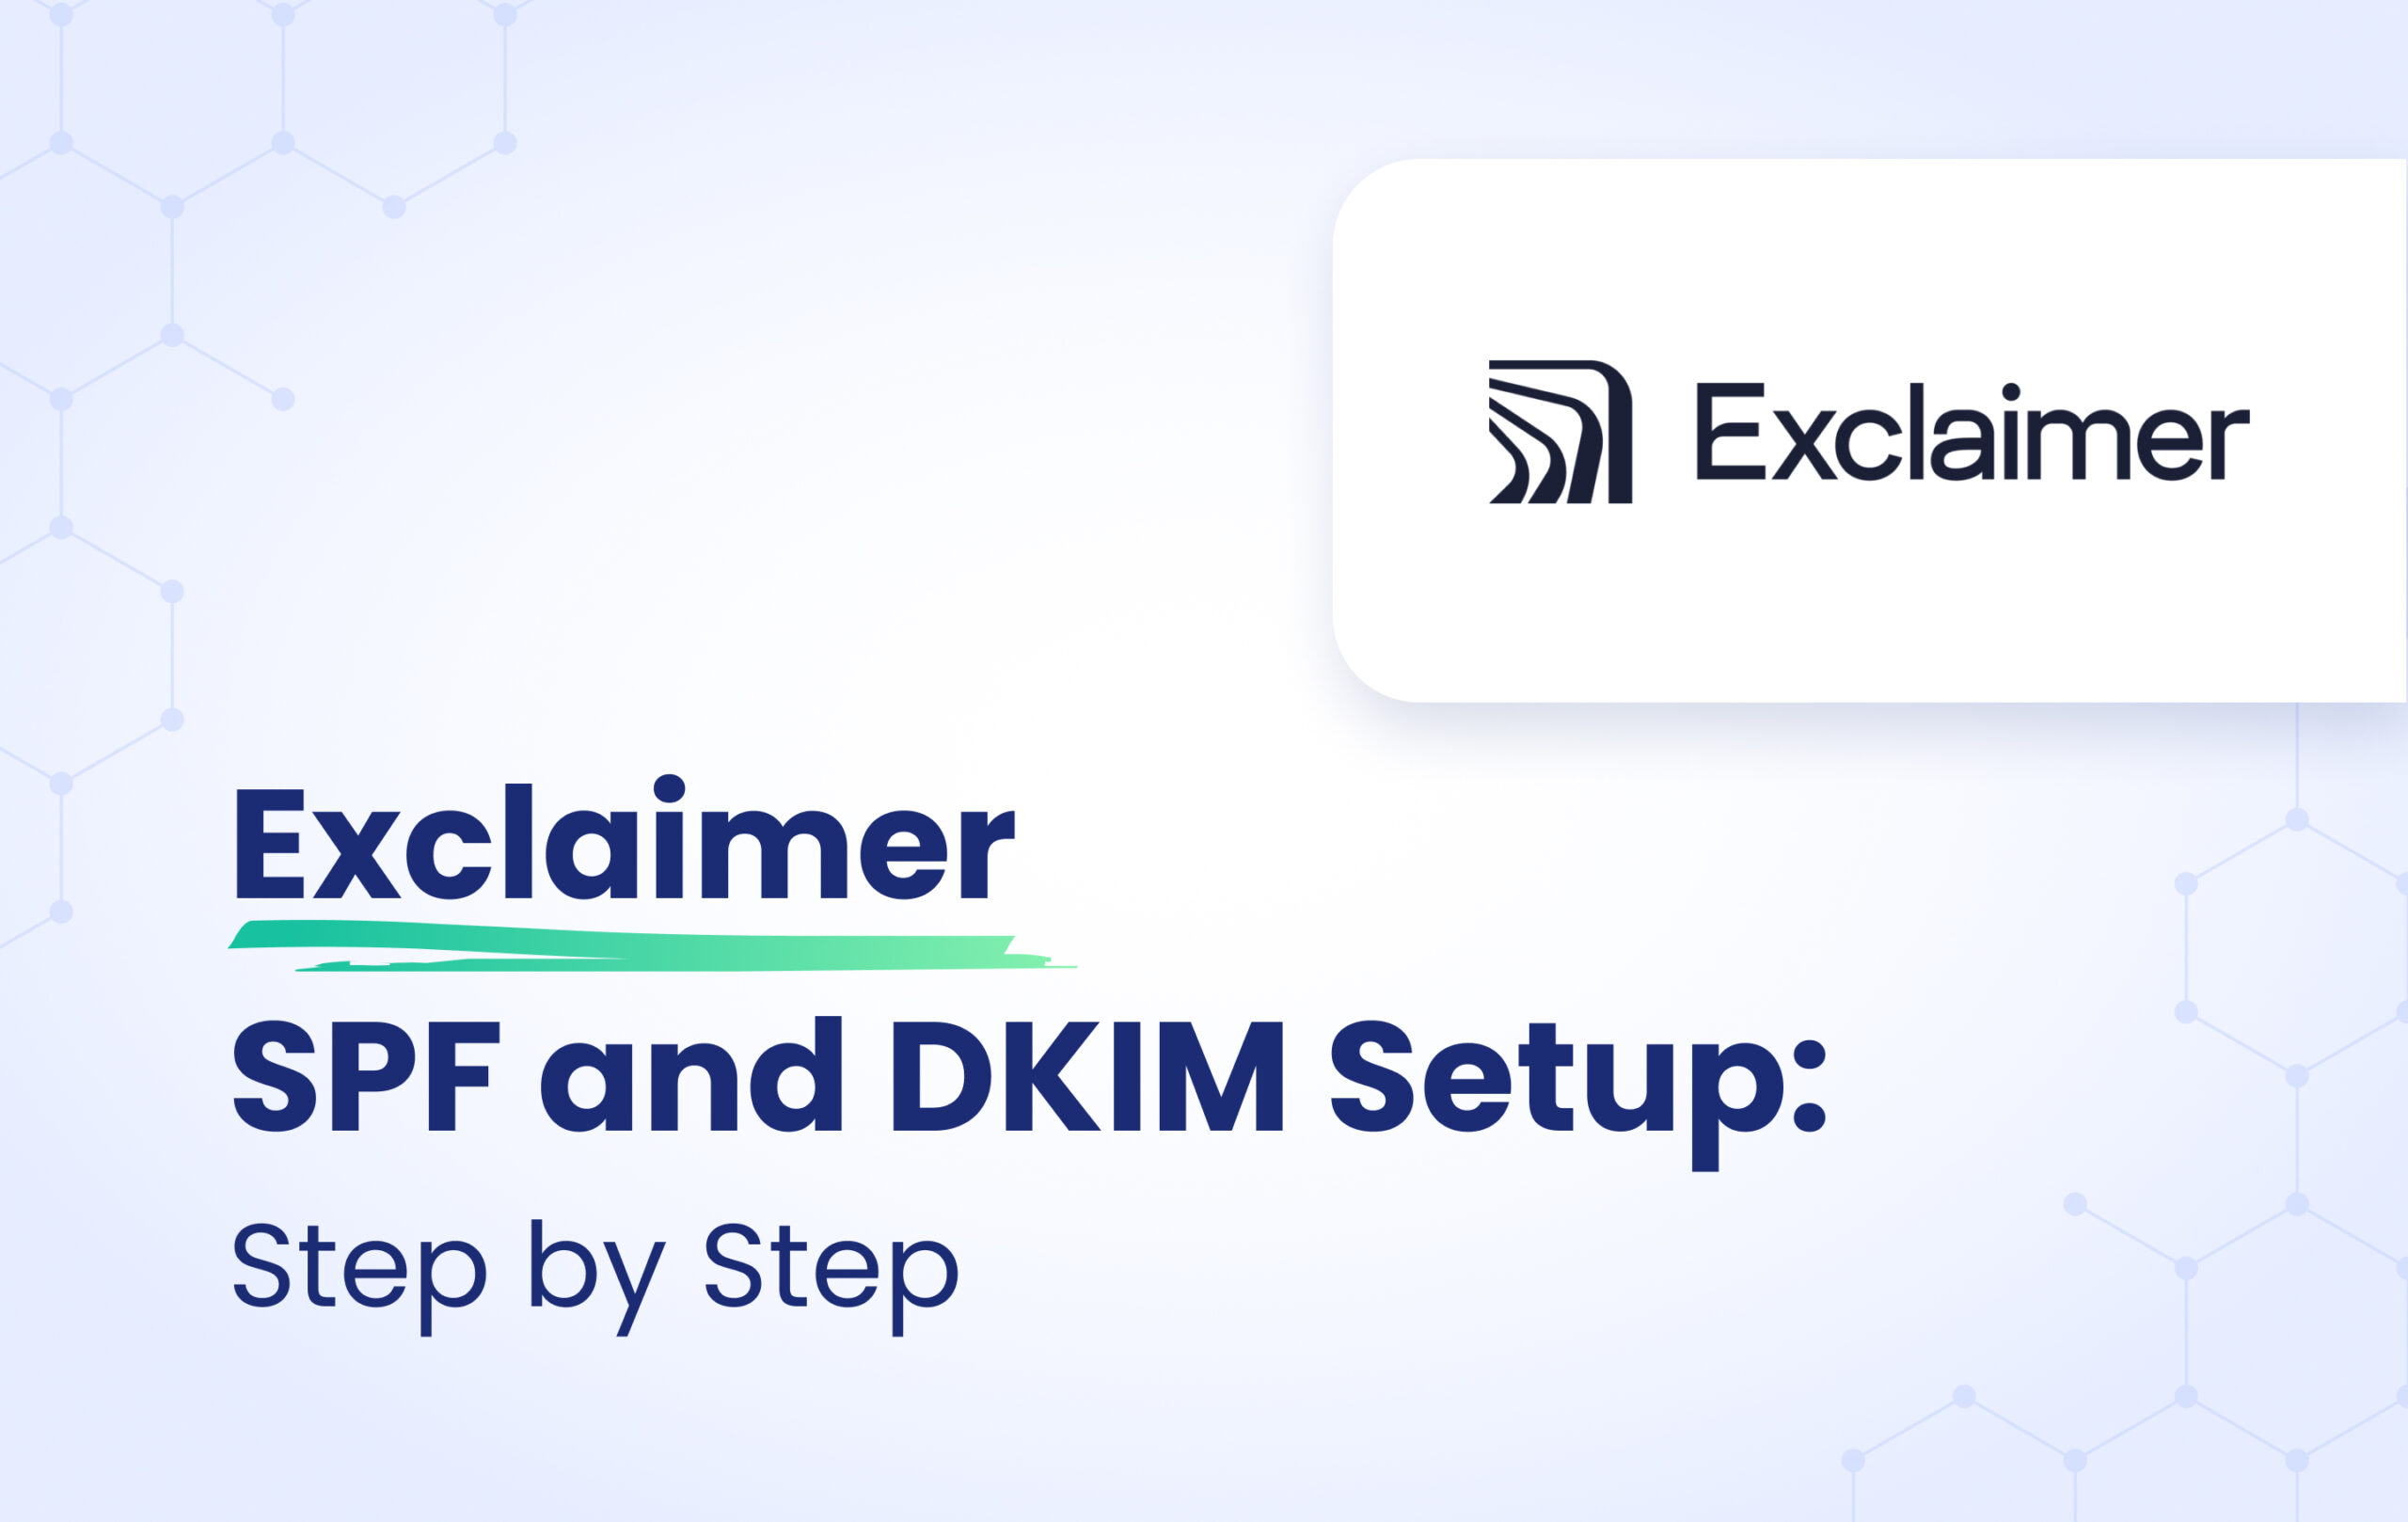 Exclaimer SPF and DKIM configuration